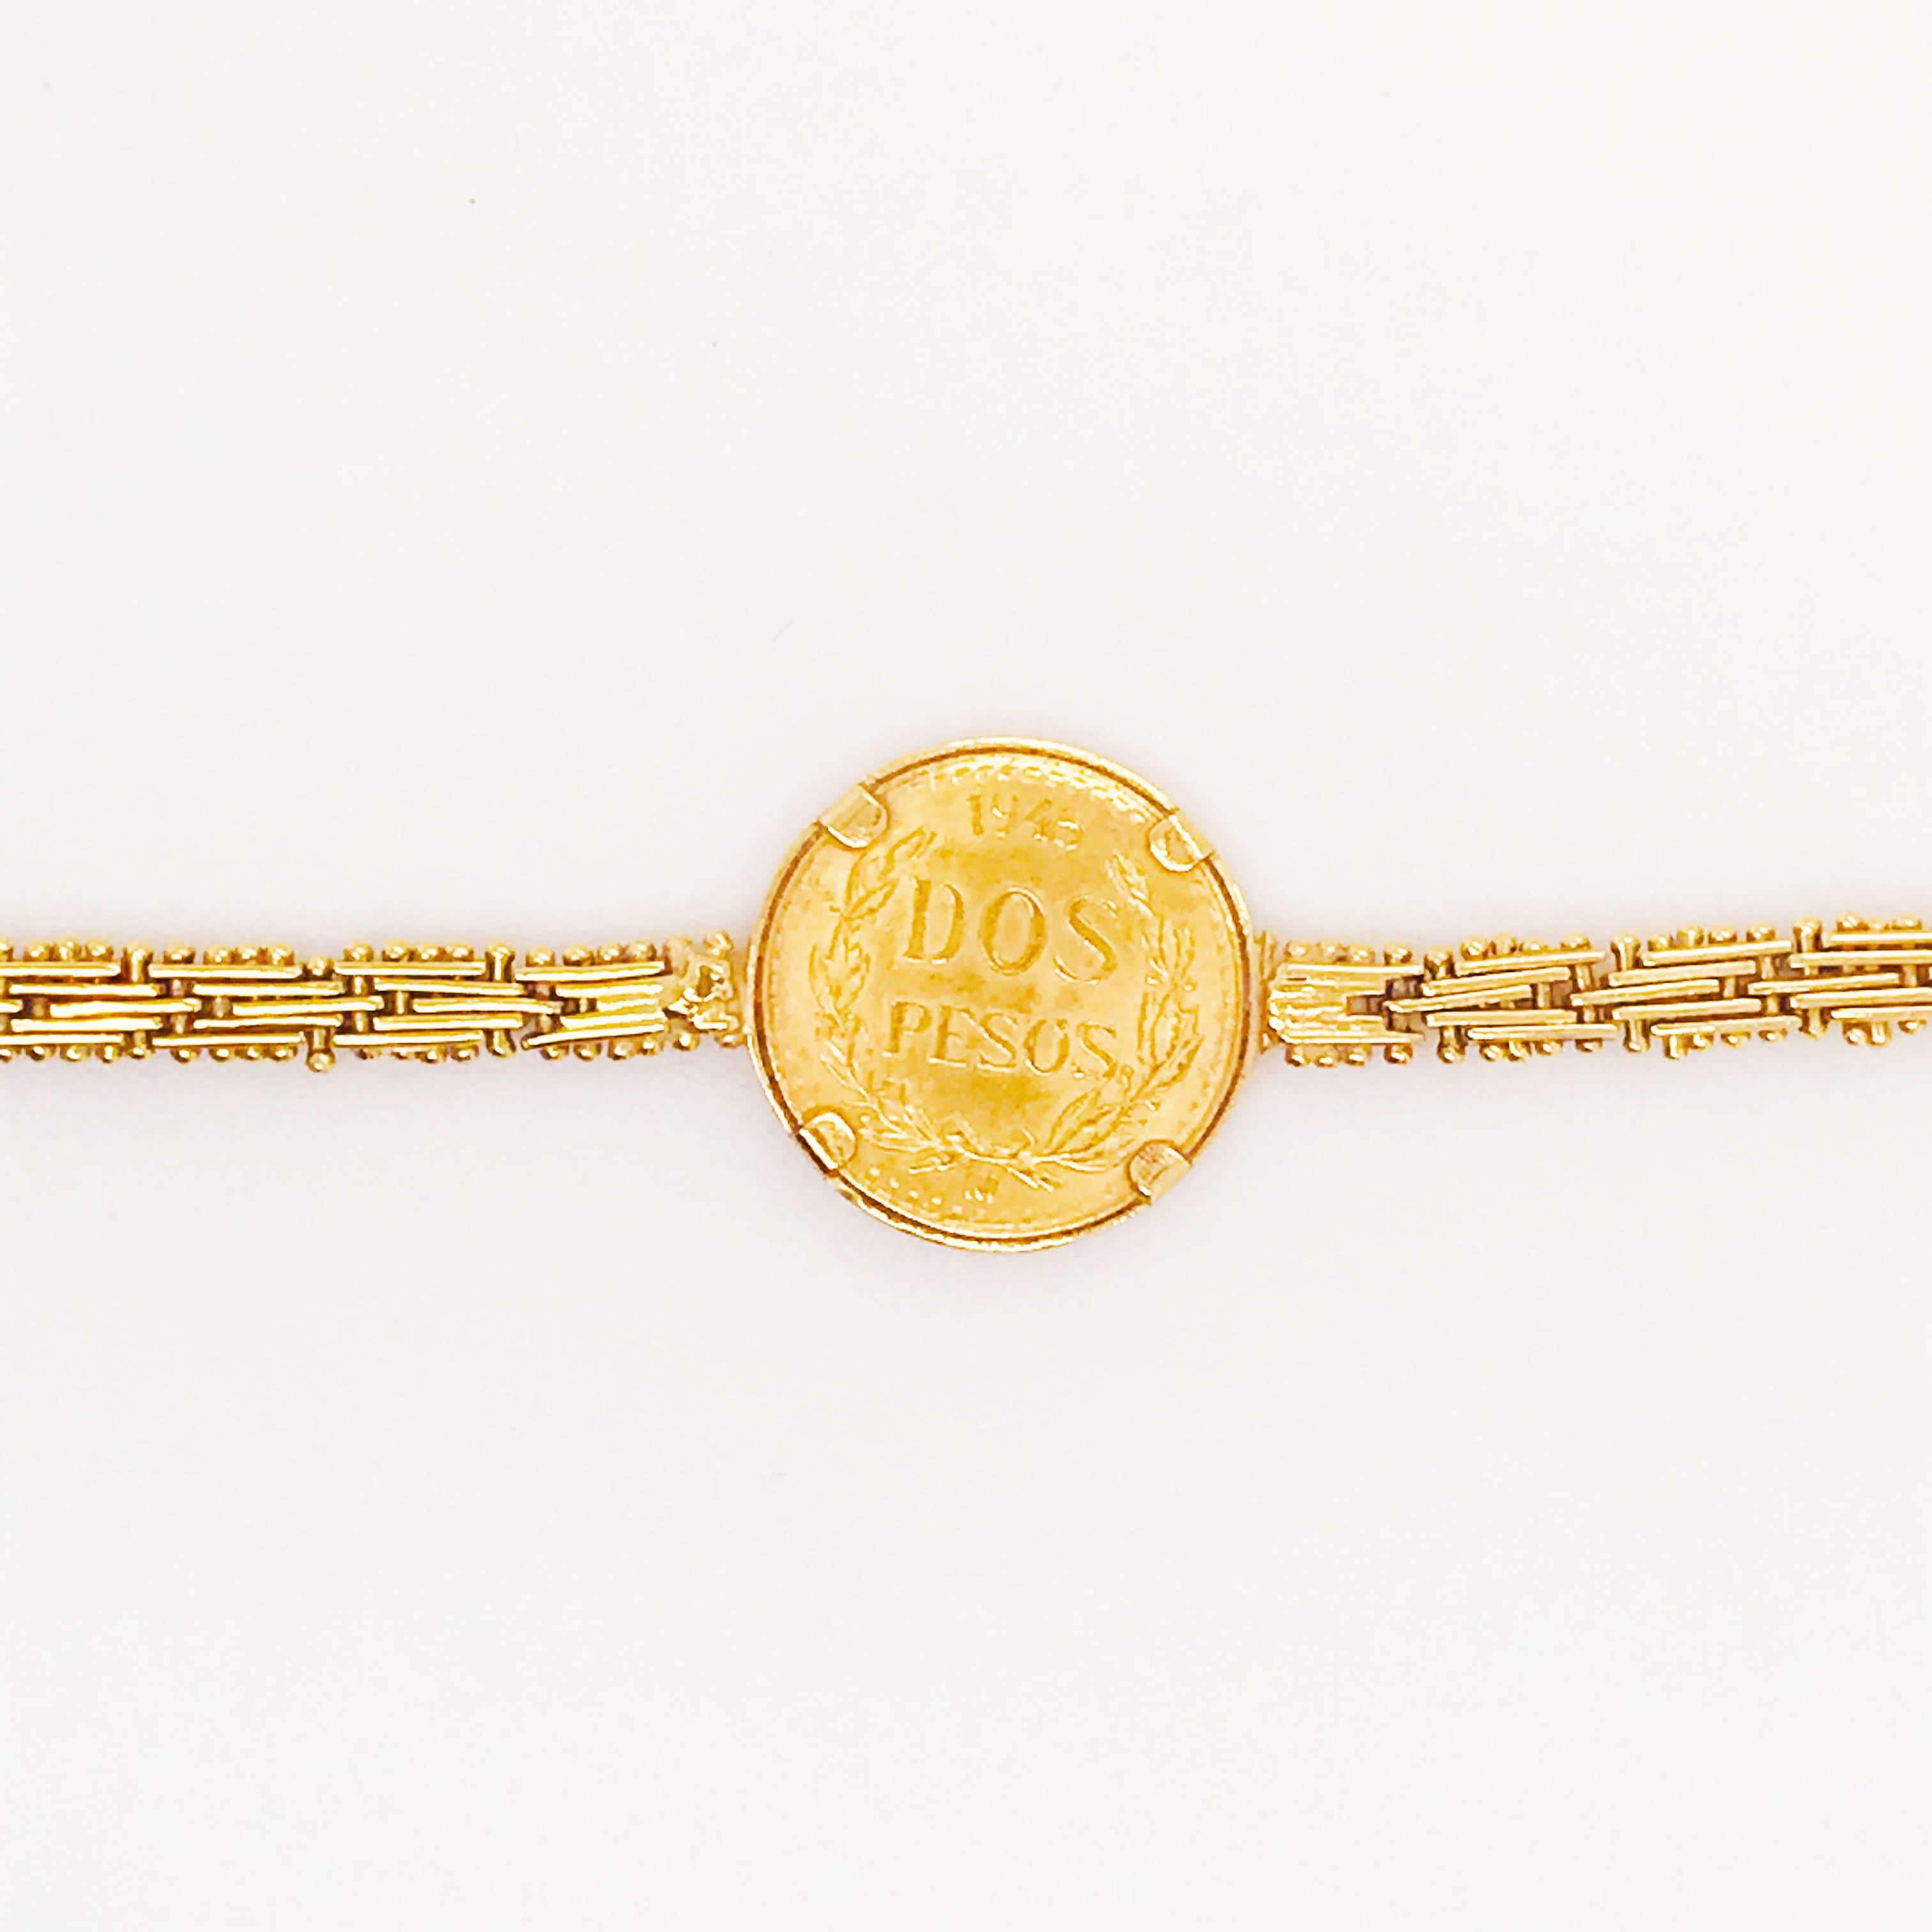 This authentic coin bracelet has a 1945 Mexico Dos Peso coin set in a 14k yellow gold coin bezel.  The coin is on a 7 inch handcrafted heavy fancy chain bracelet. Each link has been made by hand specifically for this bracelet design. The bracelet